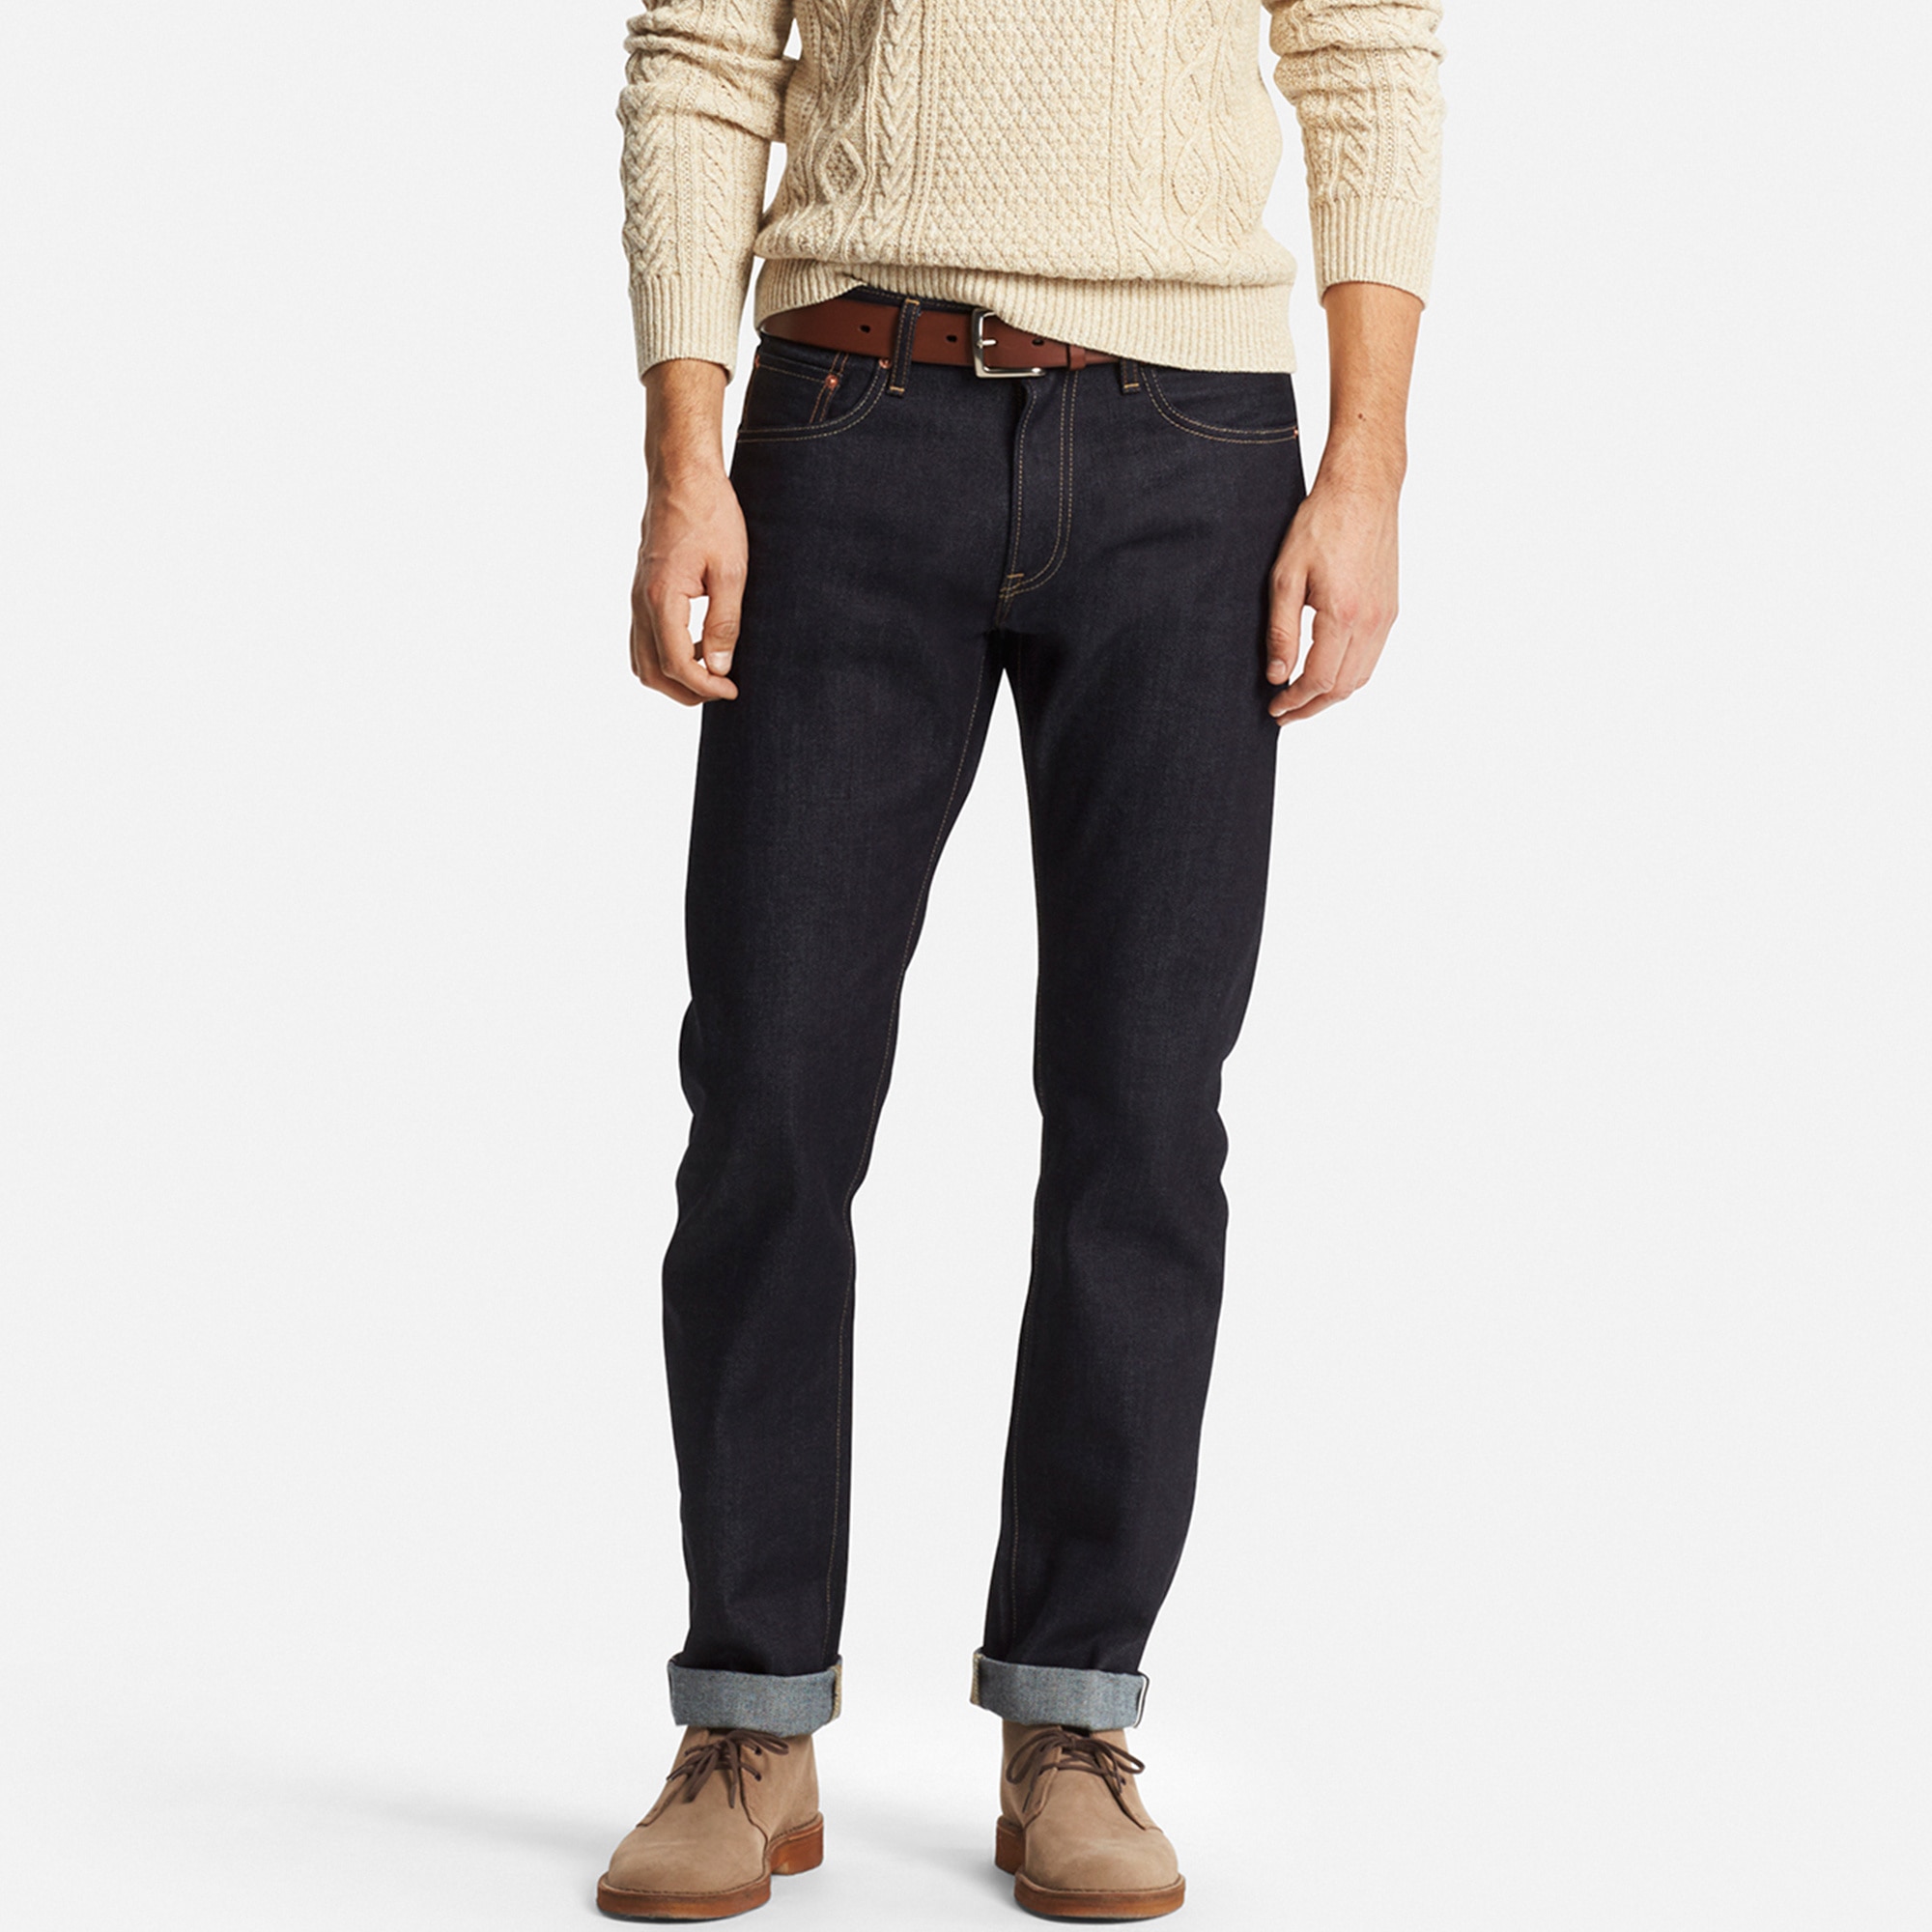 uniqlo regular fit jeans review